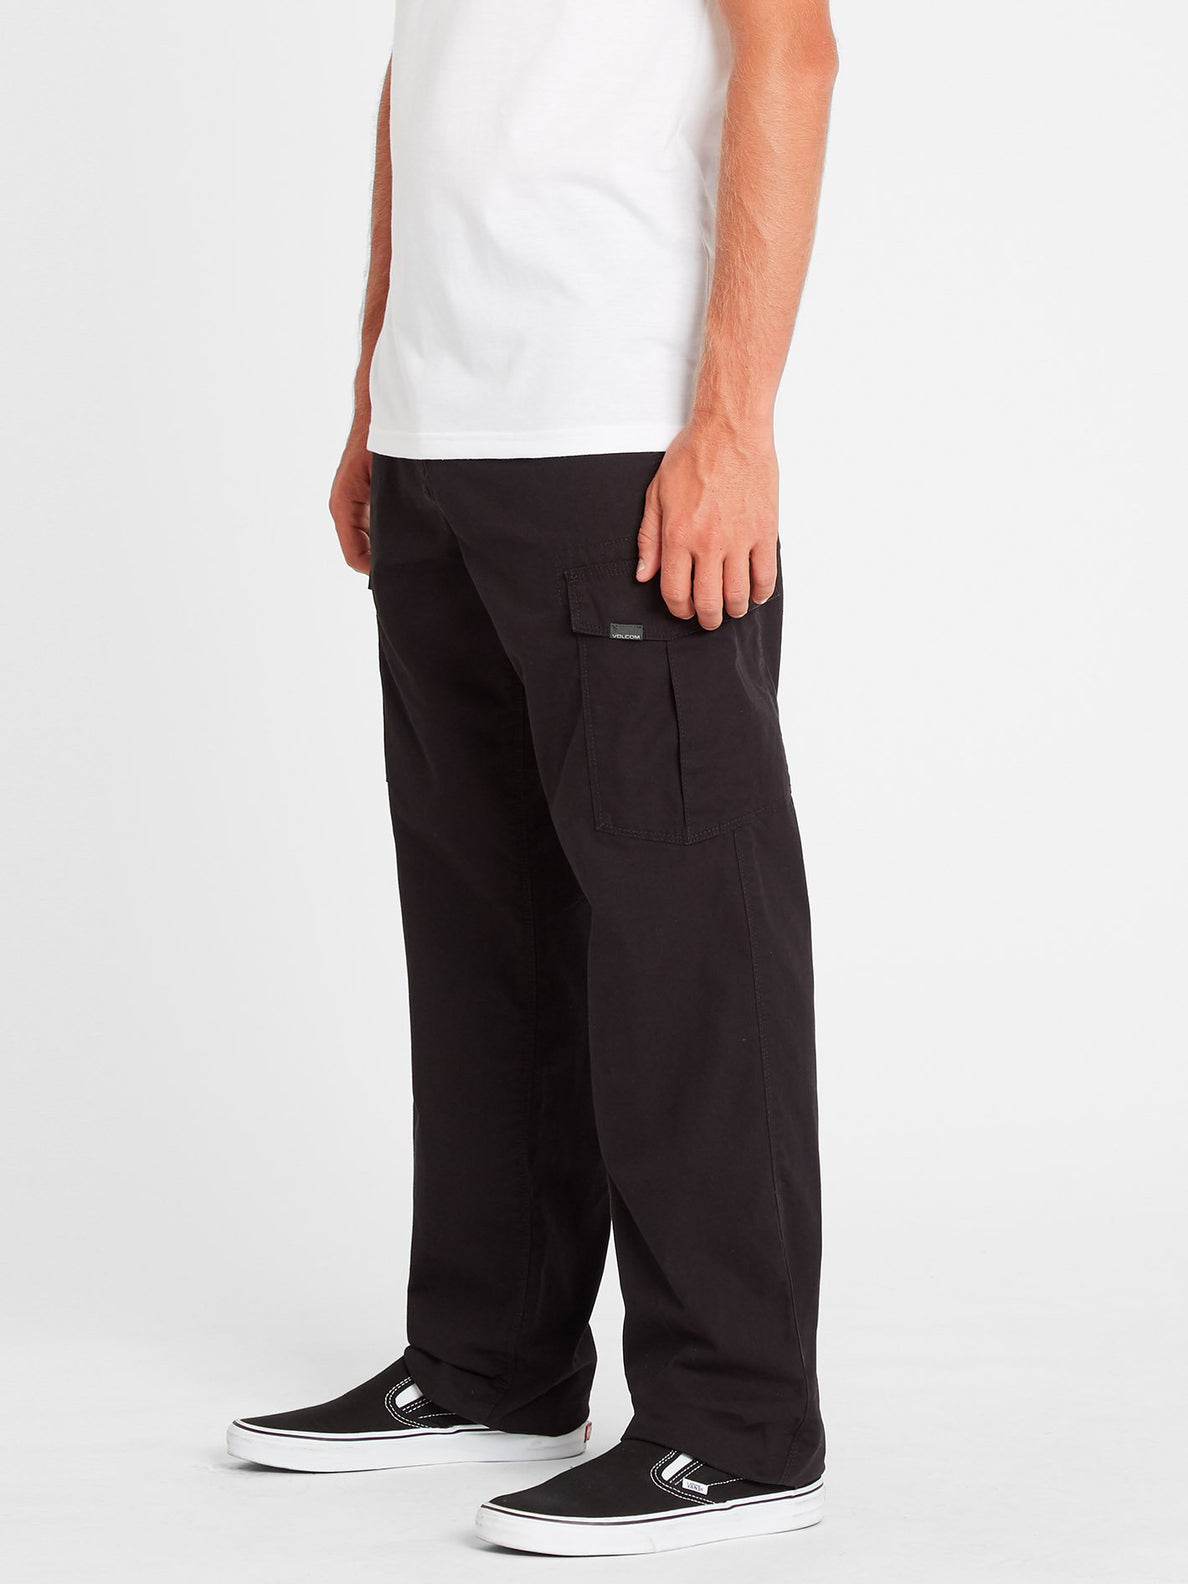 Miter Iii Cargo Pant - Black (A1112105_BLK) [3]